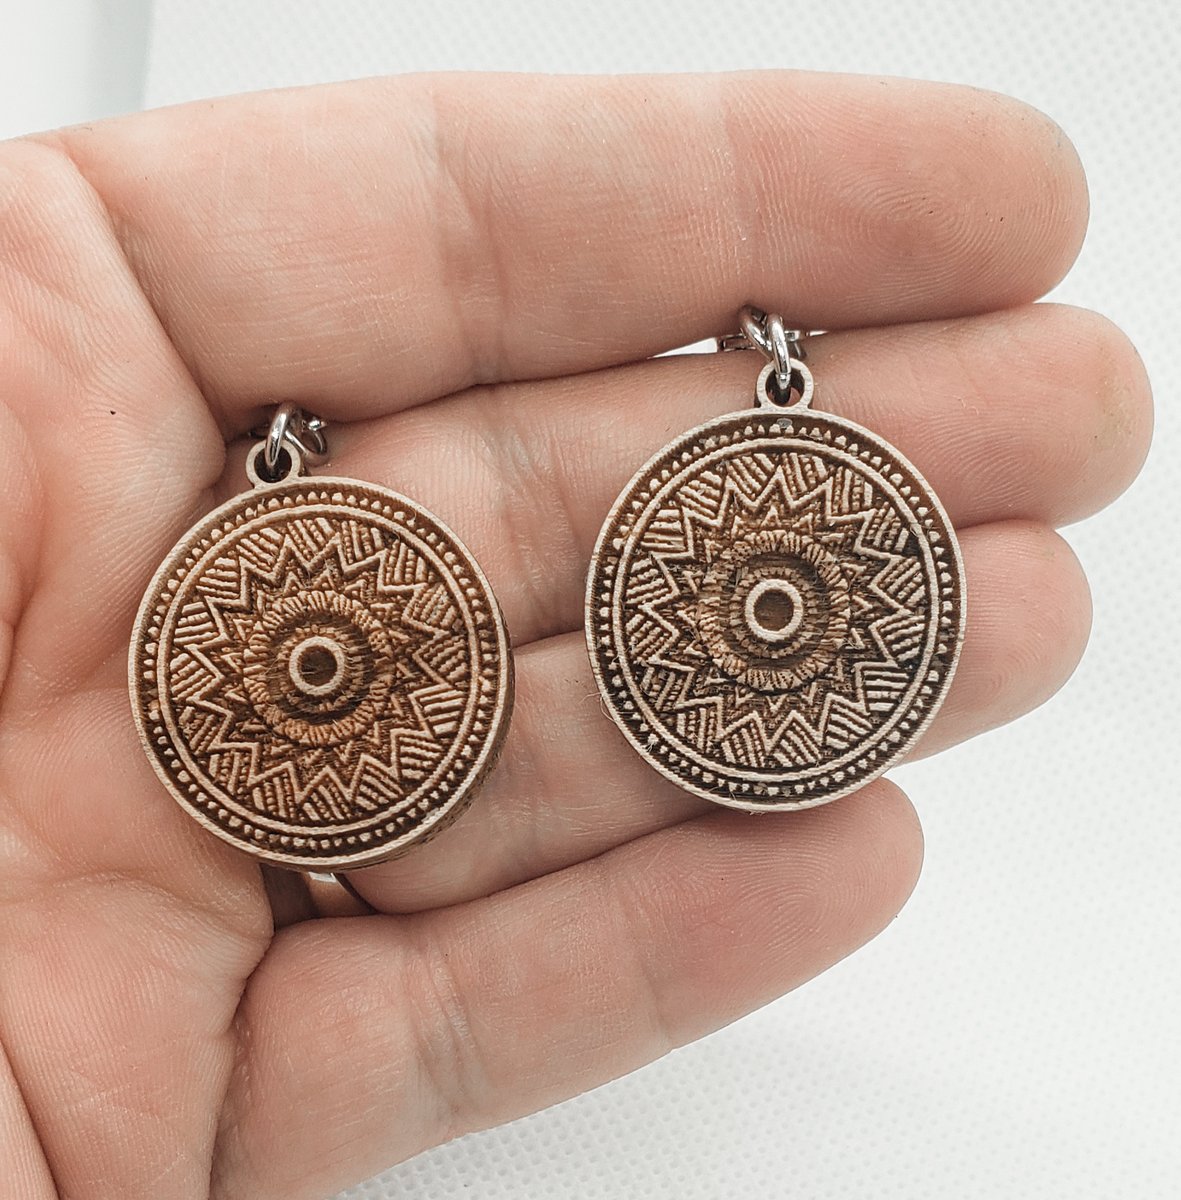 Use the code HCDSOCIAL and get 25% off your entire purchase of these and any of the fun items through the link below.

etsy.com/listing/814241…

#sunburst #sunburstearrings #shopsmall #handmade #create #laserengraved #lasercut #dangleearrings #art